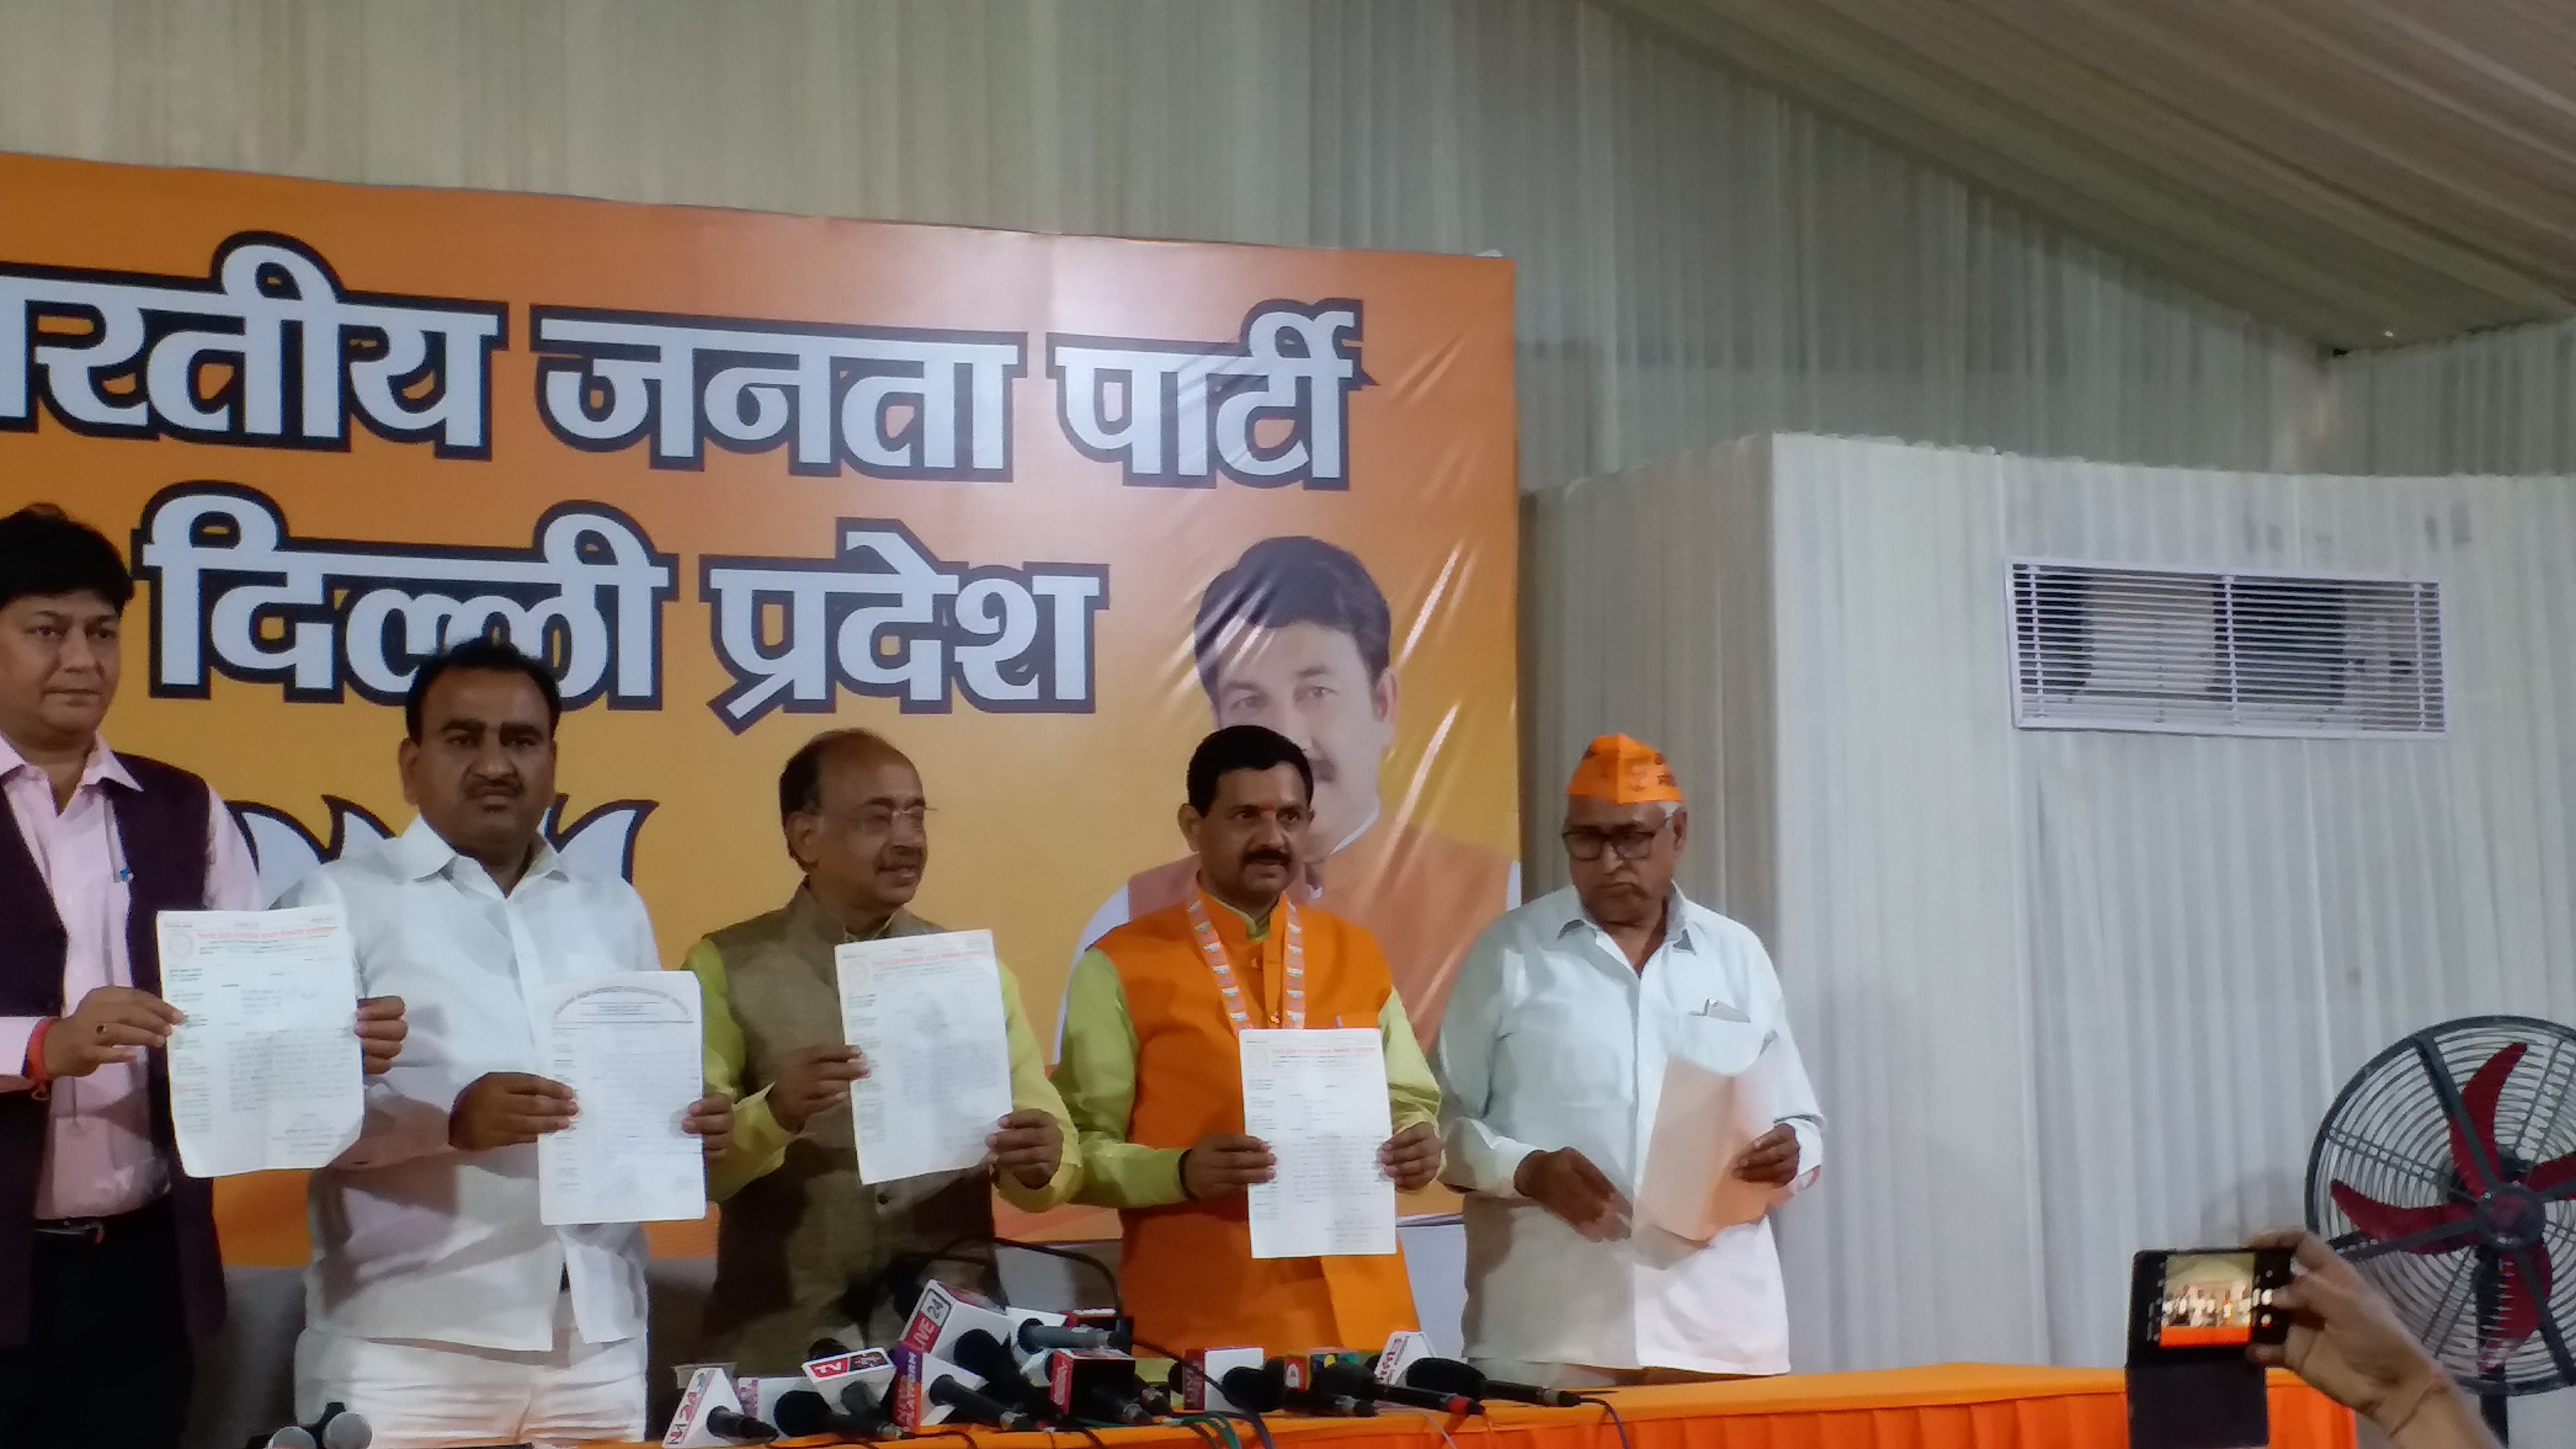 Bjp leaders during press conference